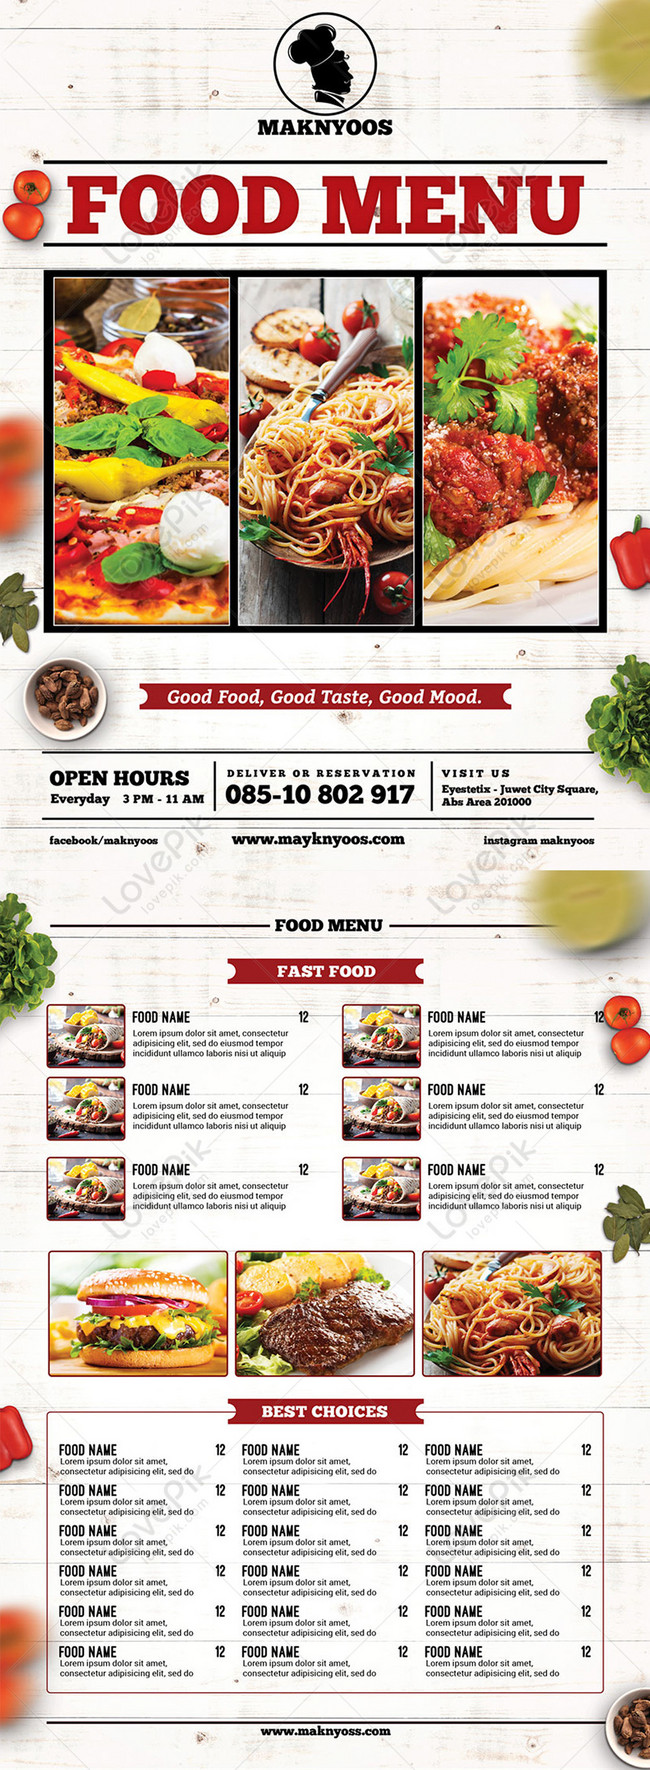 White Wood Background Restaurant Food Menu Template Image Picture Free Download 450010586 Lovepik Com